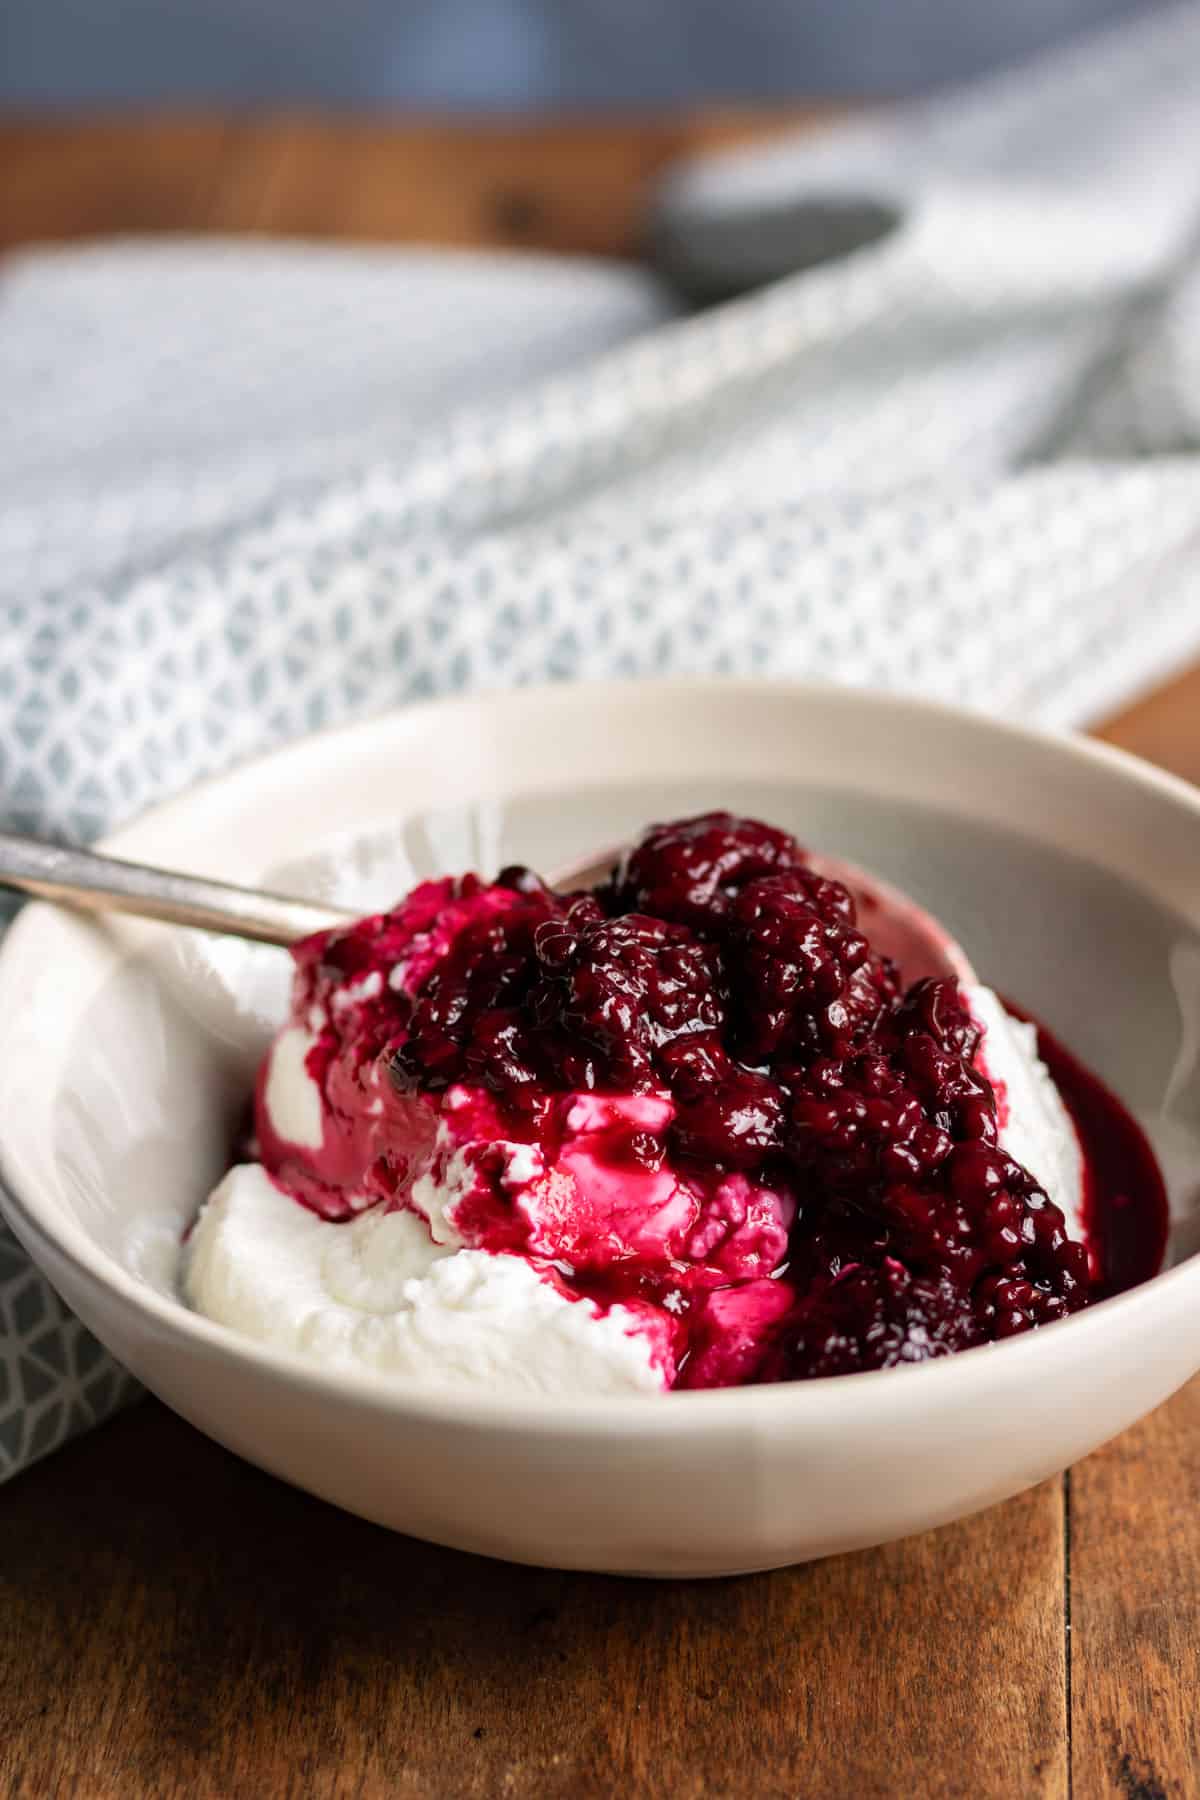 Bowl of yogurt with blackberry compote sauce.